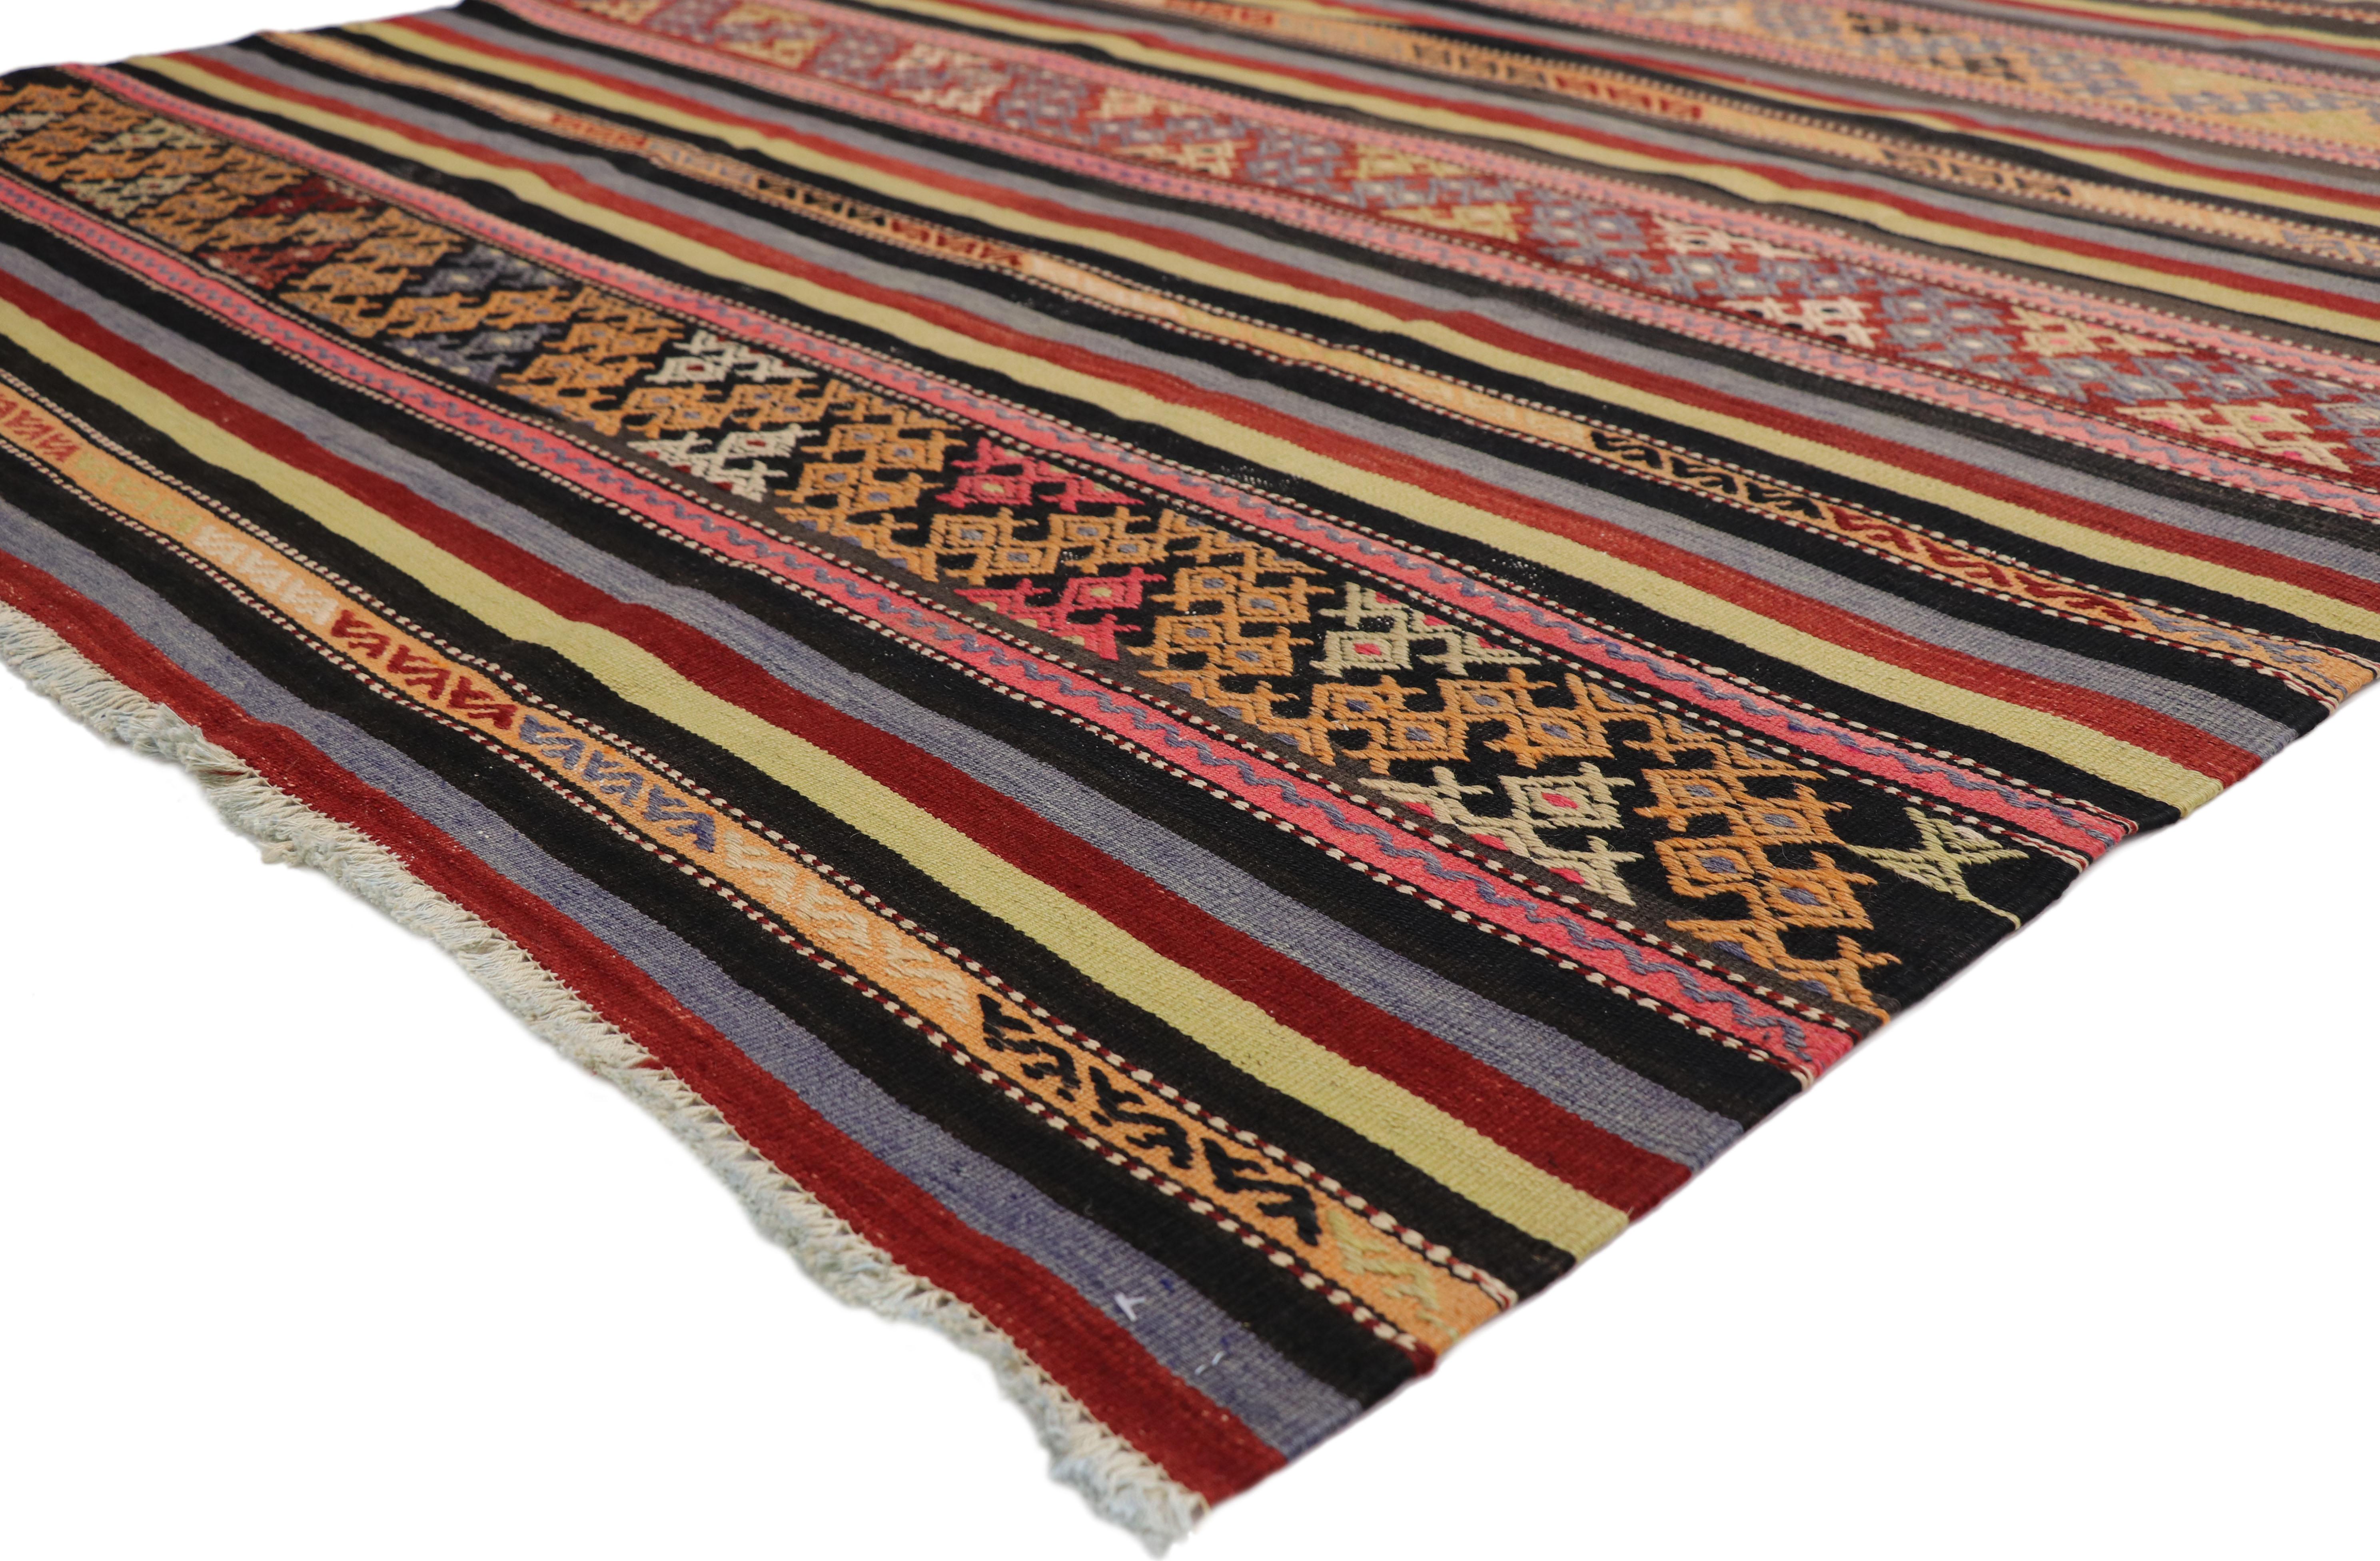 Hand-Woven Vintage Turkish Striped Kilim Rug with Tribal Bohemian Style, Flat-Weave Rug For Sale